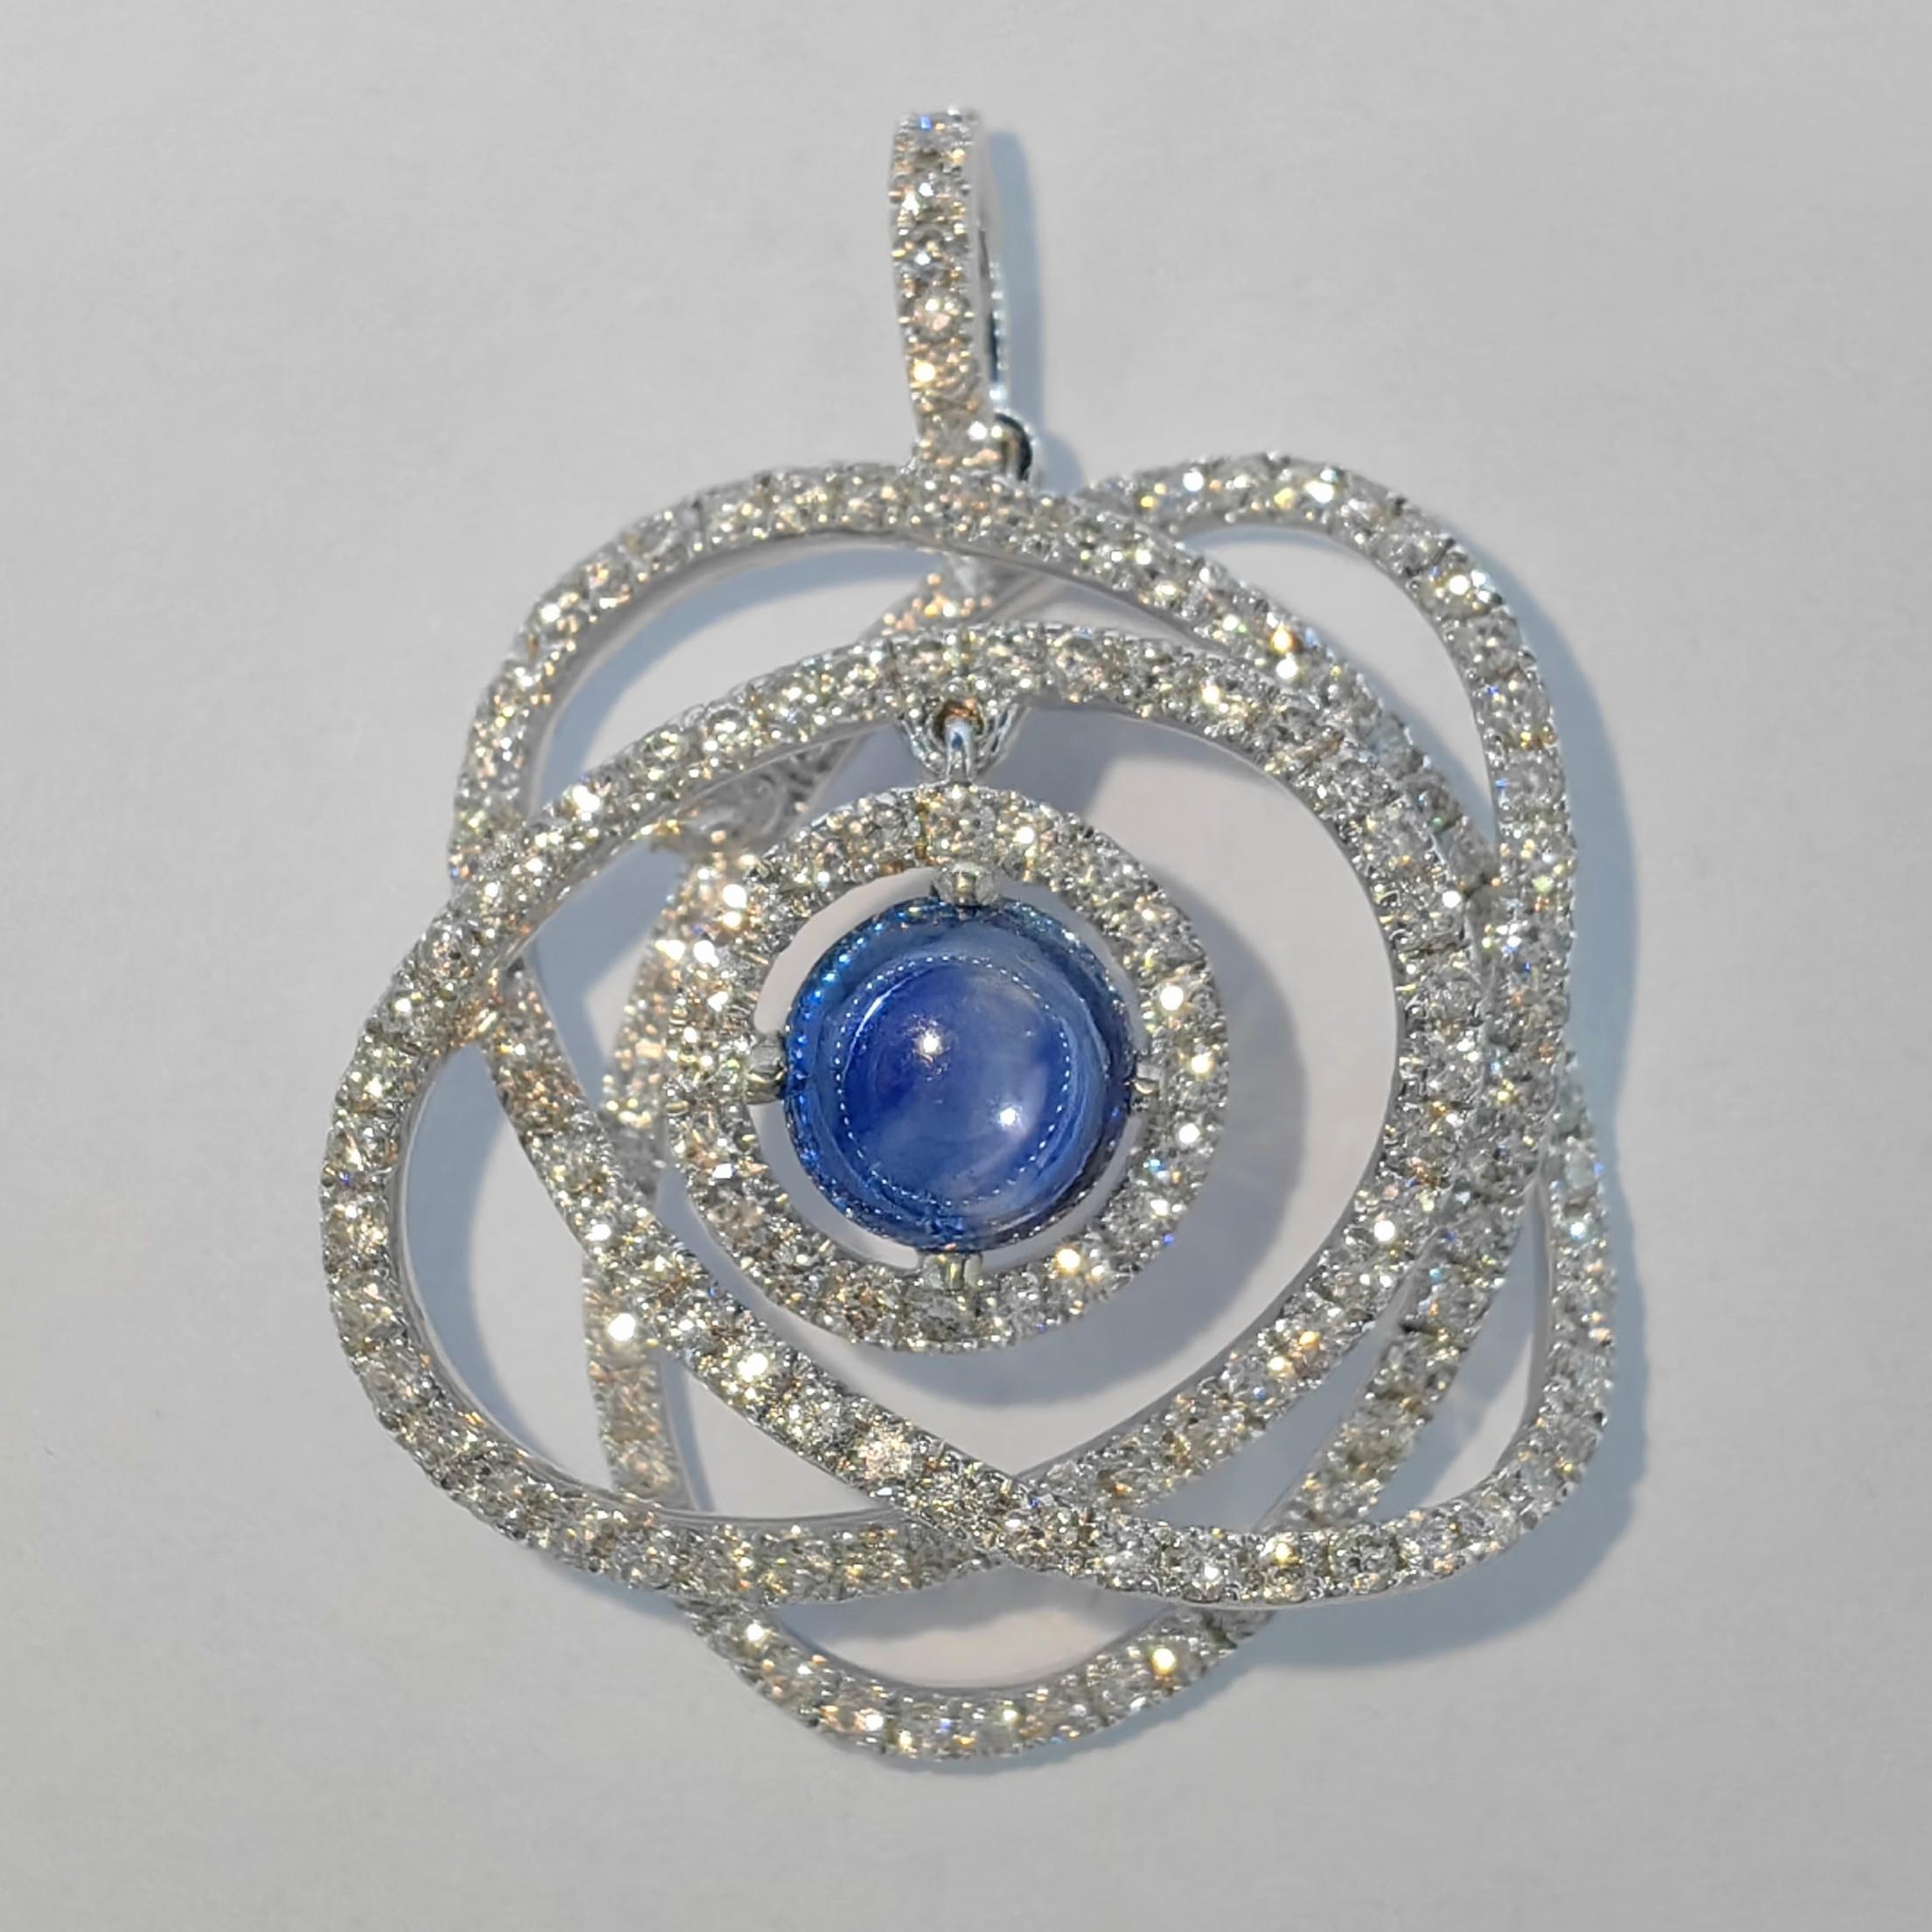 Introducing our remarkable Atom/Whirling Galaxy Cabochon Blue Sapphire Diamond Pendant, a captivating fusion of science and artistry. This pendant draws inspiration from the mysterious realms of the universe, presenting itself as a mesmerizing